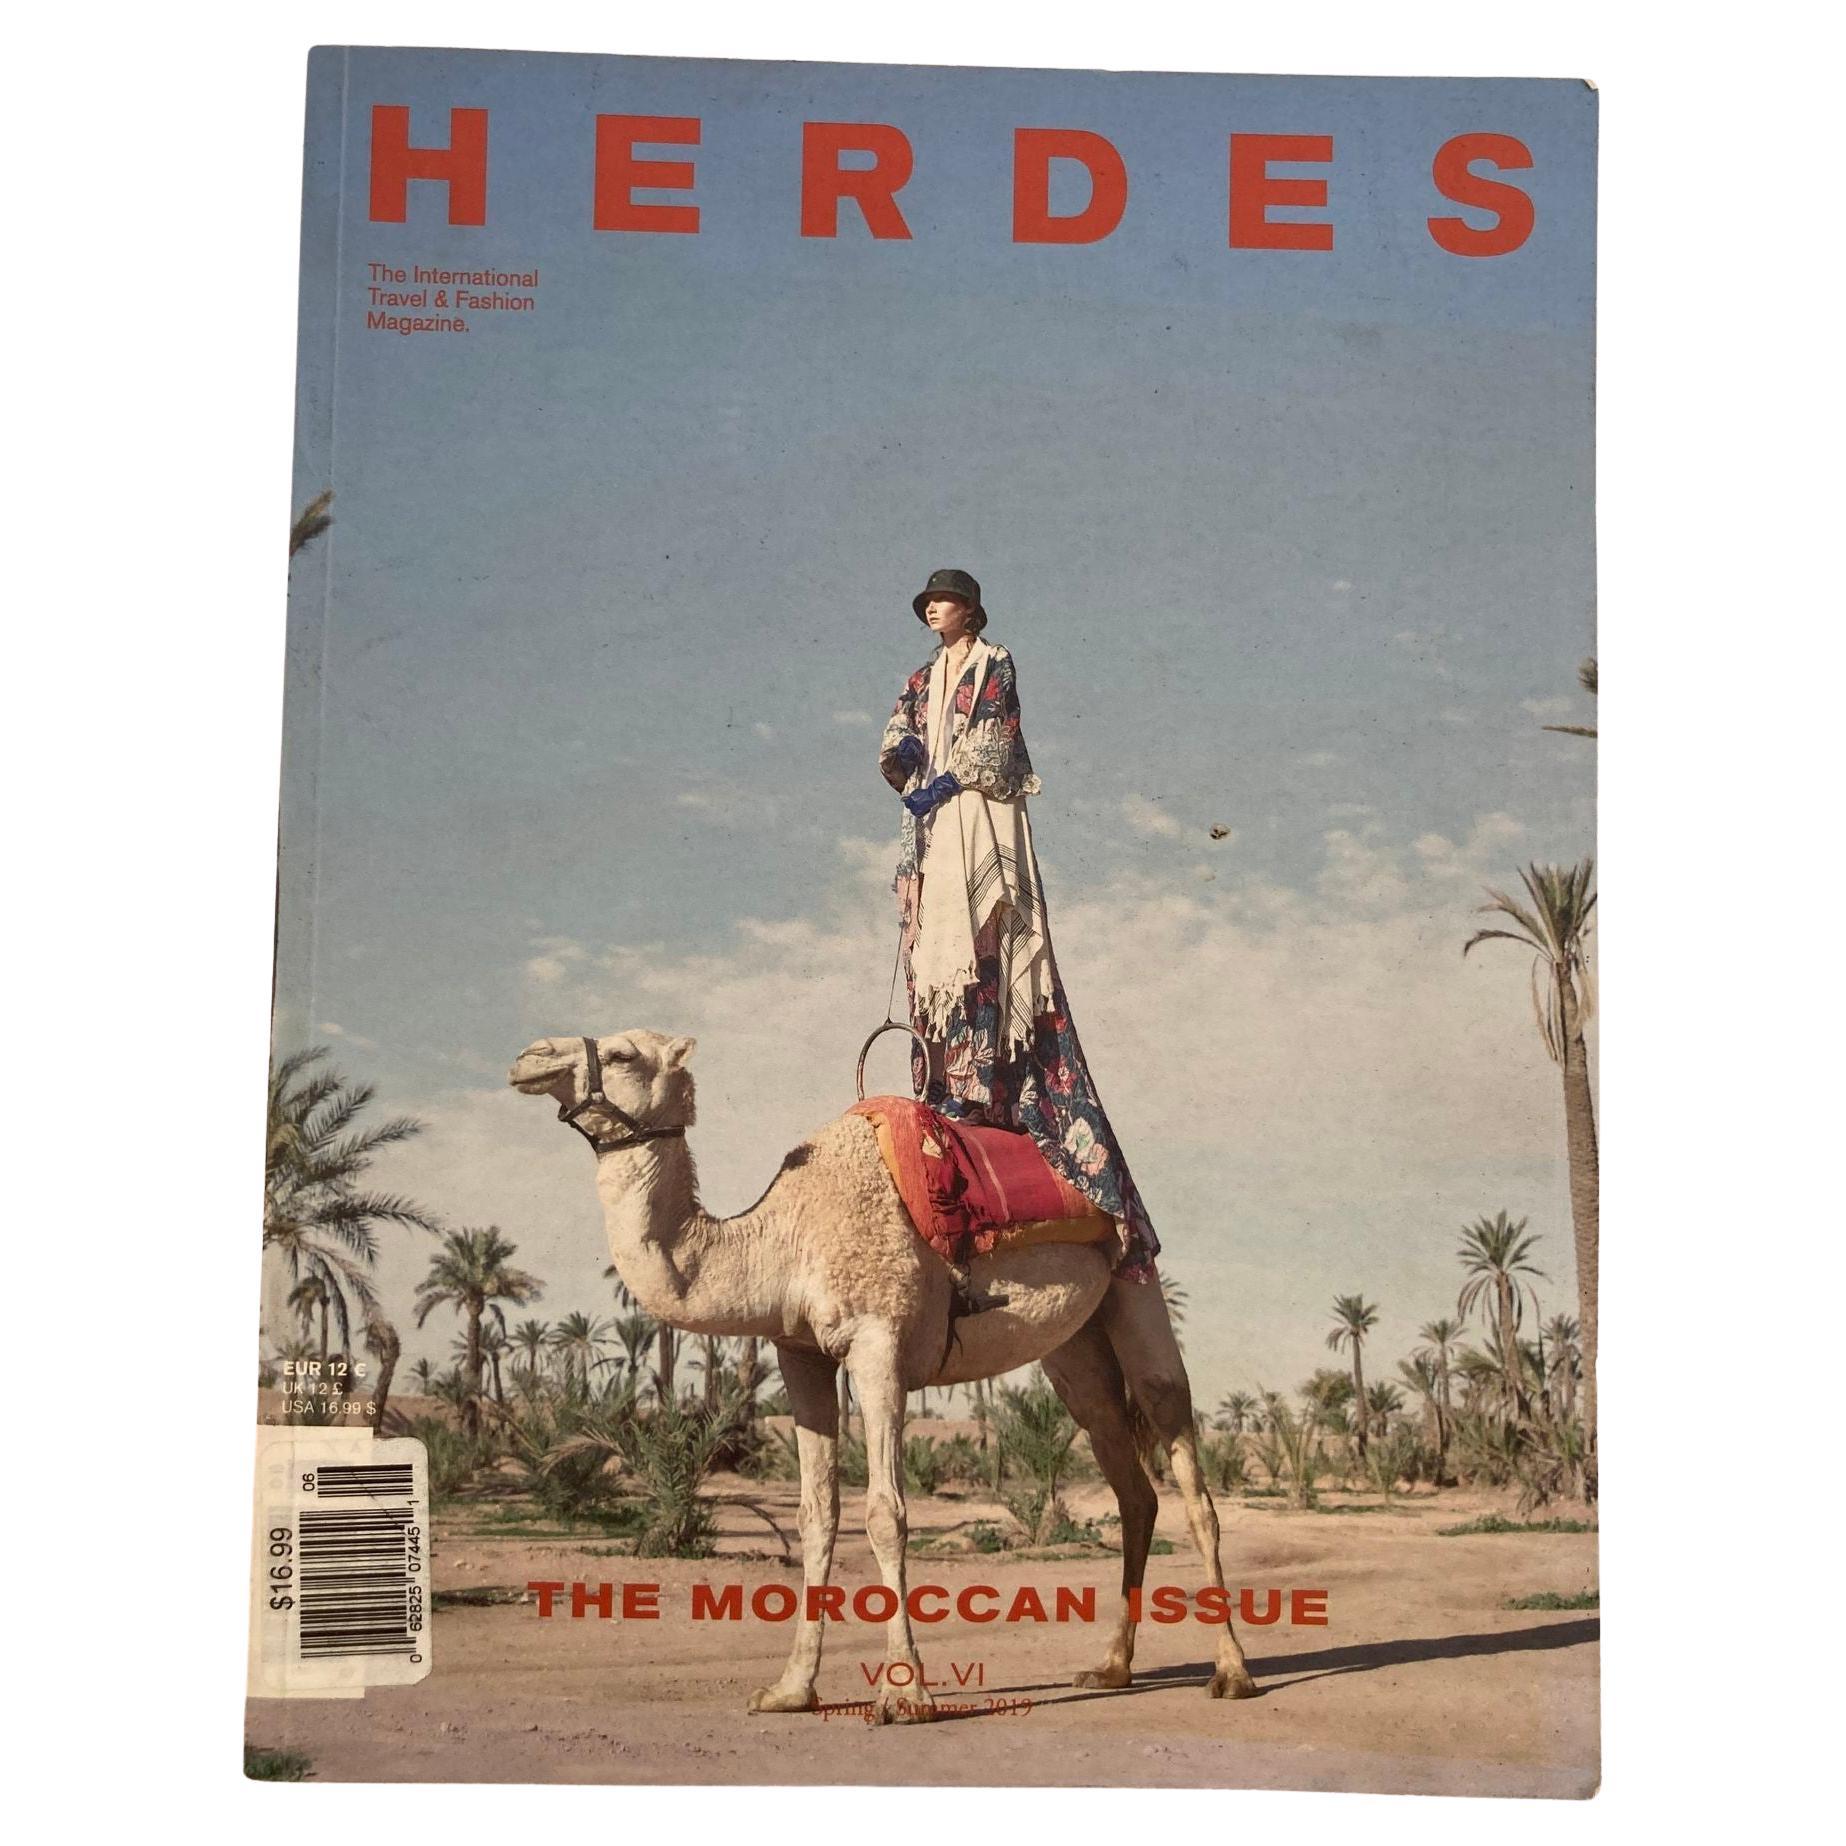 The Moroccan Issue · Vol. Vi, Herdes.15 July, 2019